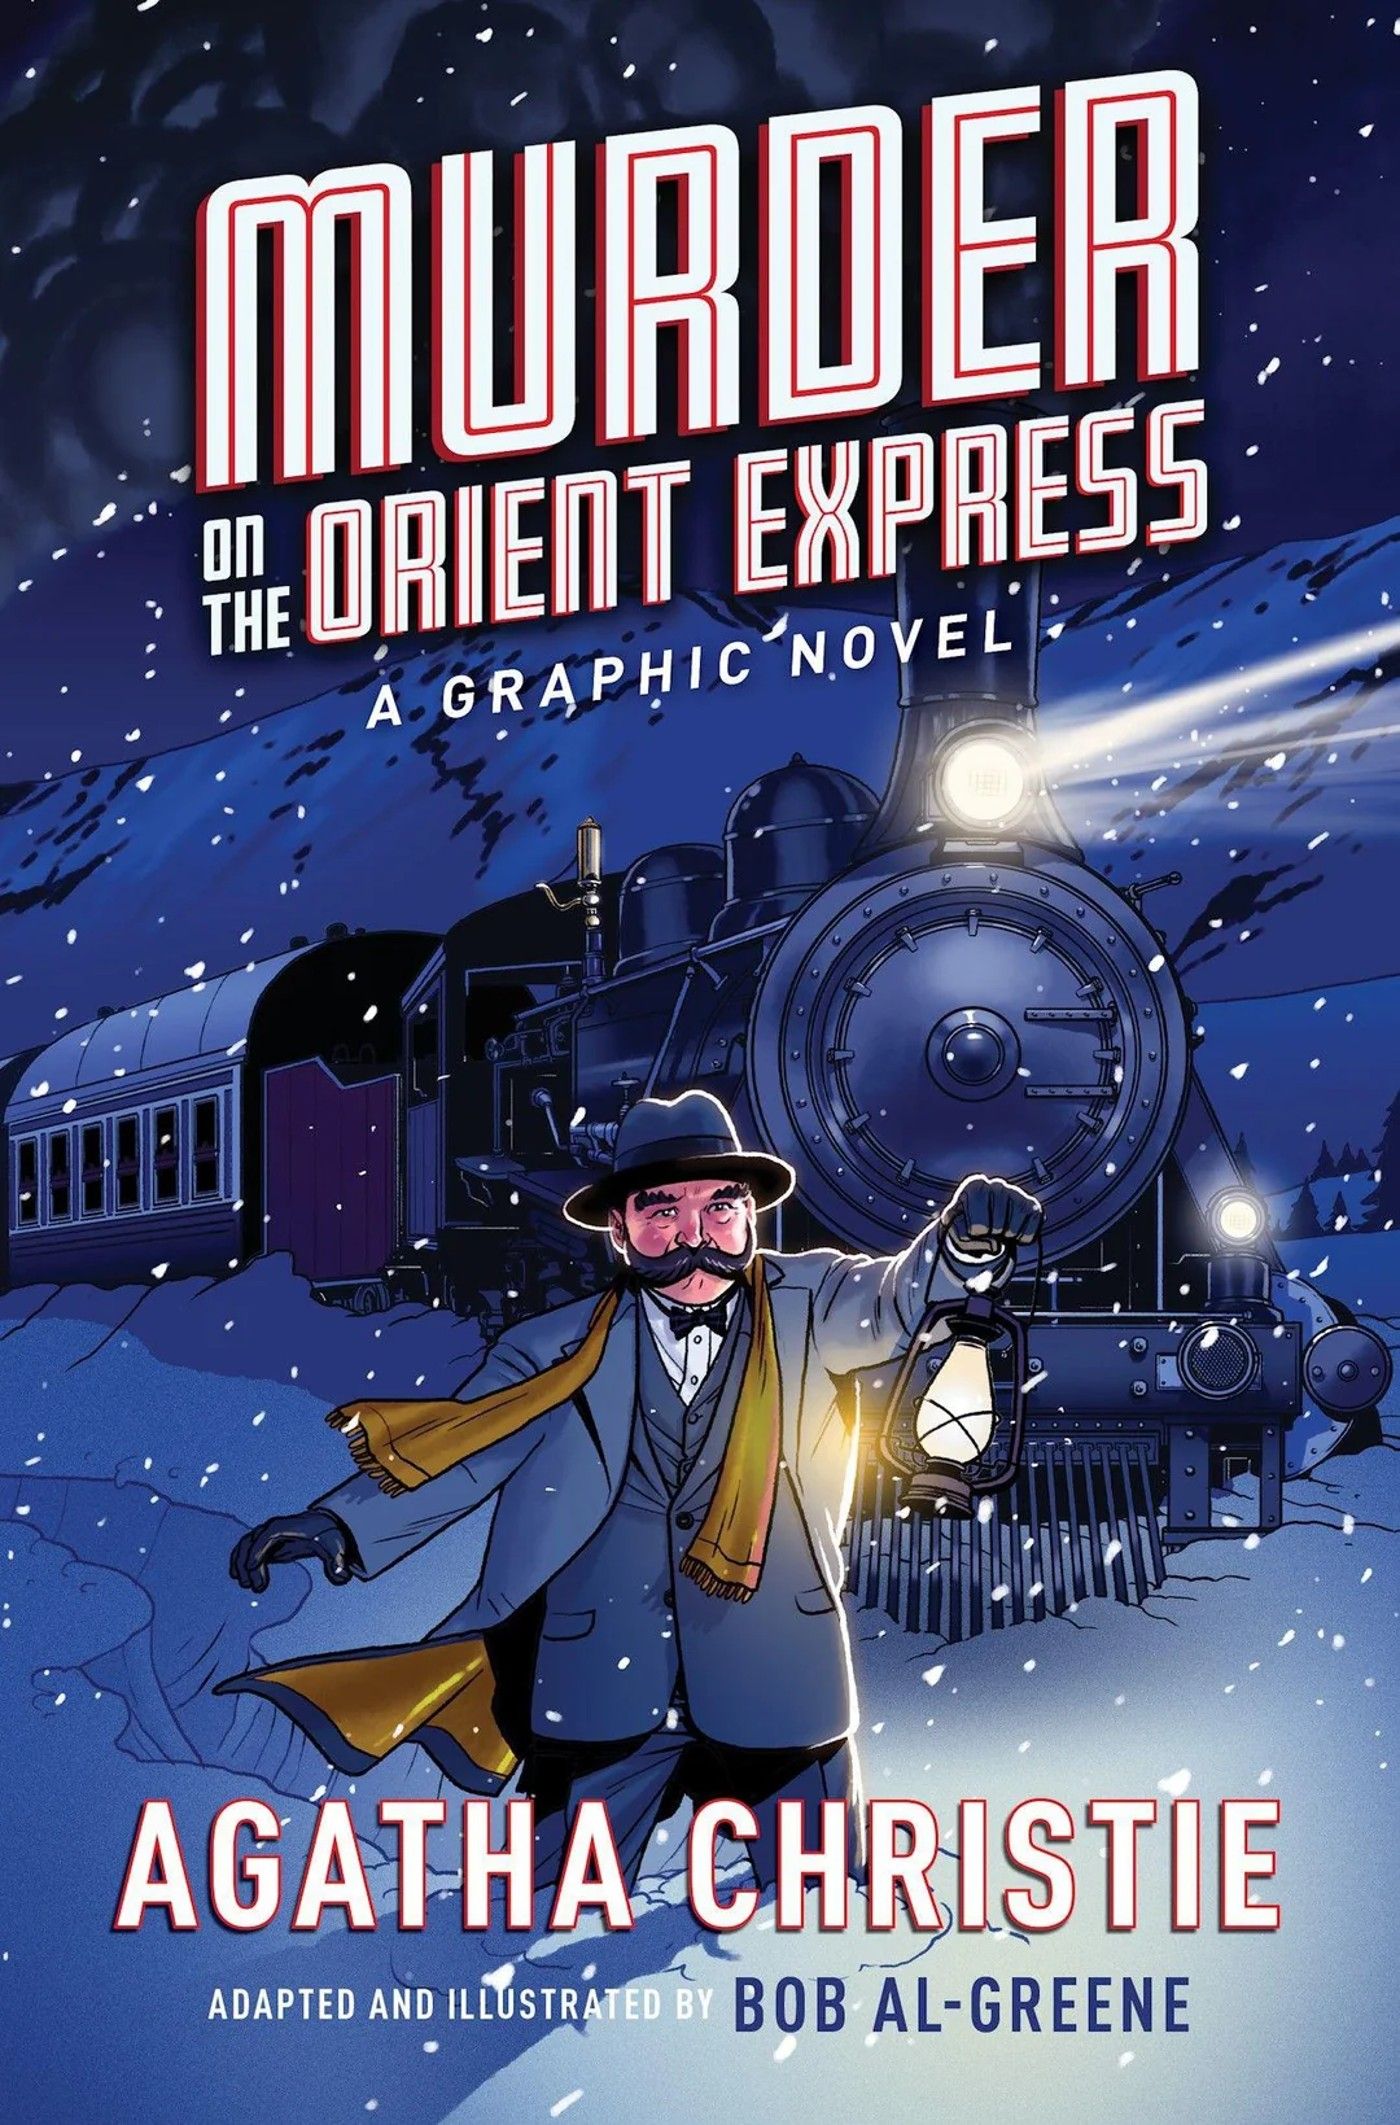 Murder on the Orient Express Is a Loyal Comic Adaptation with a Stunning Sense of Place (Review)